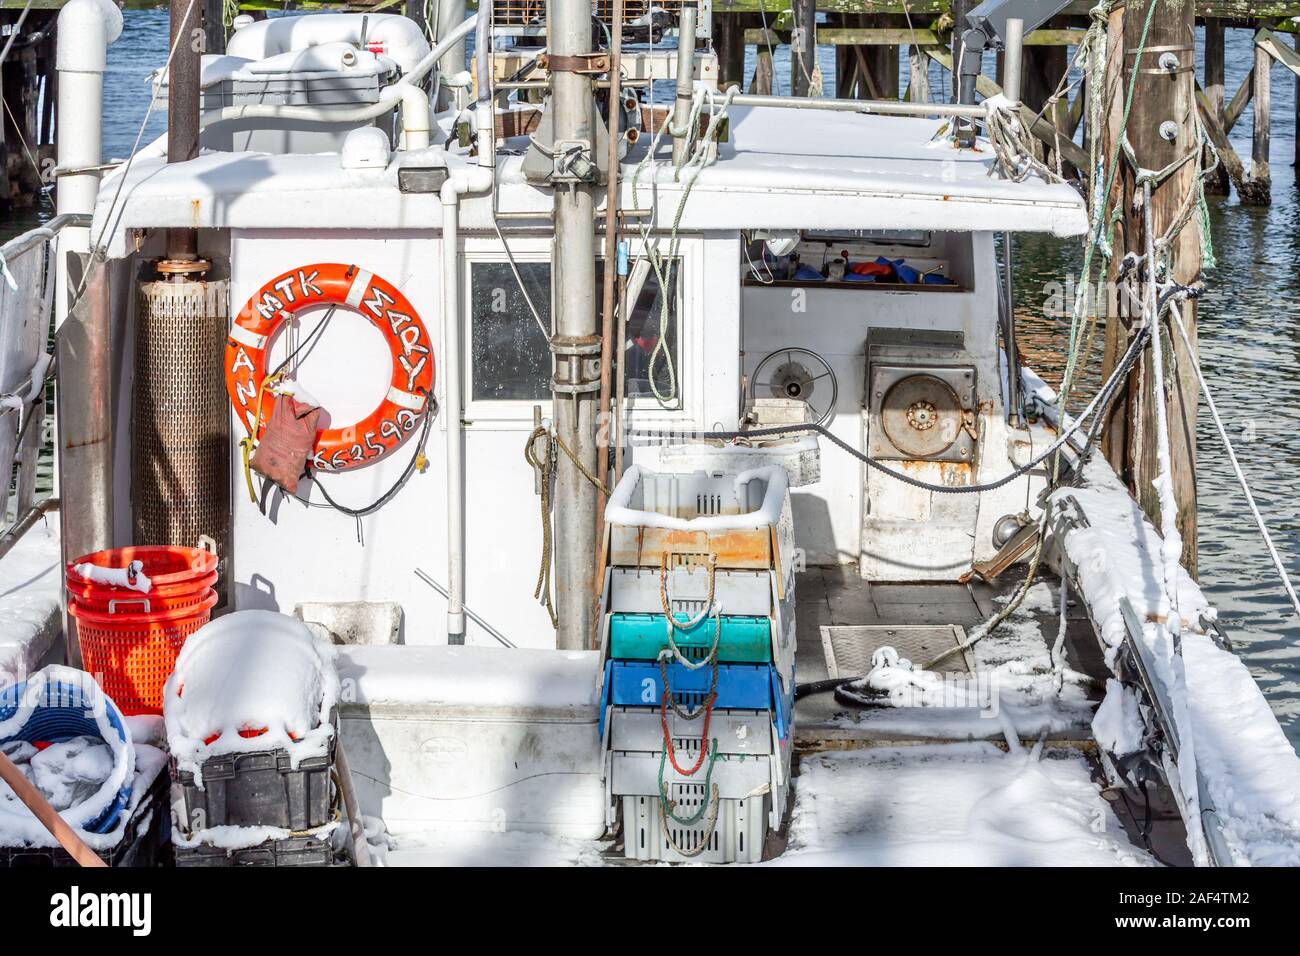 Detail of a fishing boat on a cold winter day in Montauk, NY Stock Photo